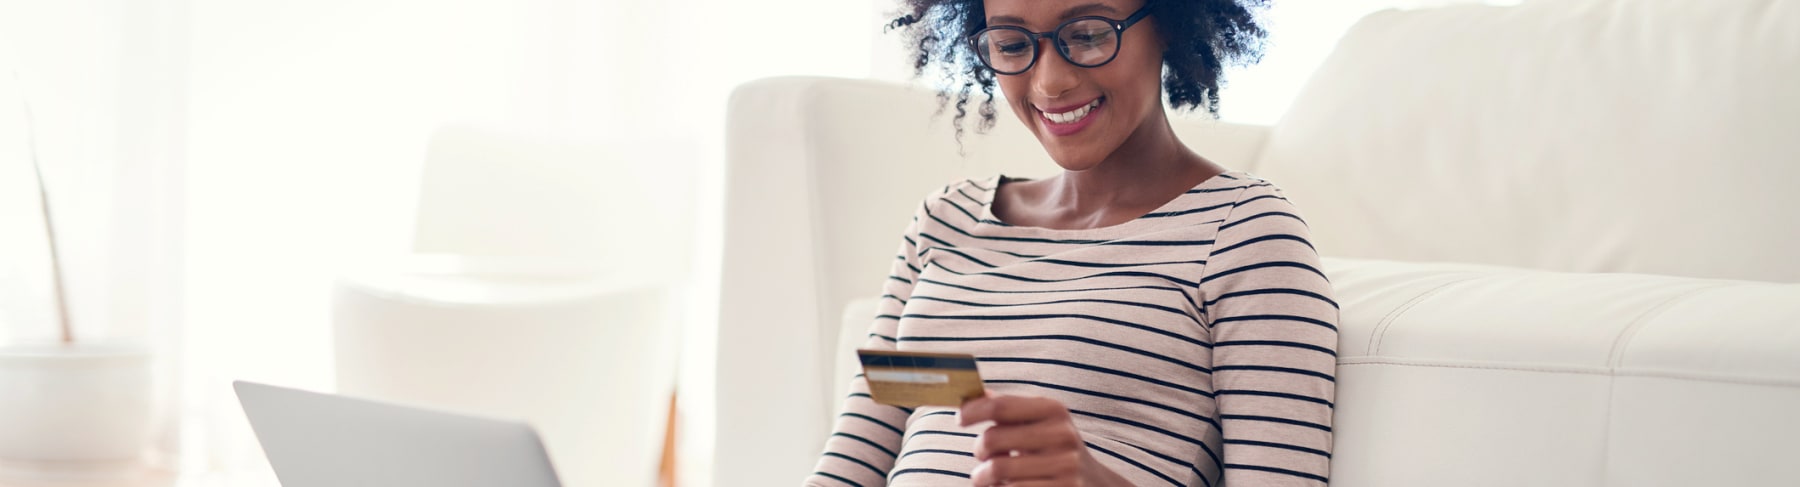 Black woman shops online with credit card.